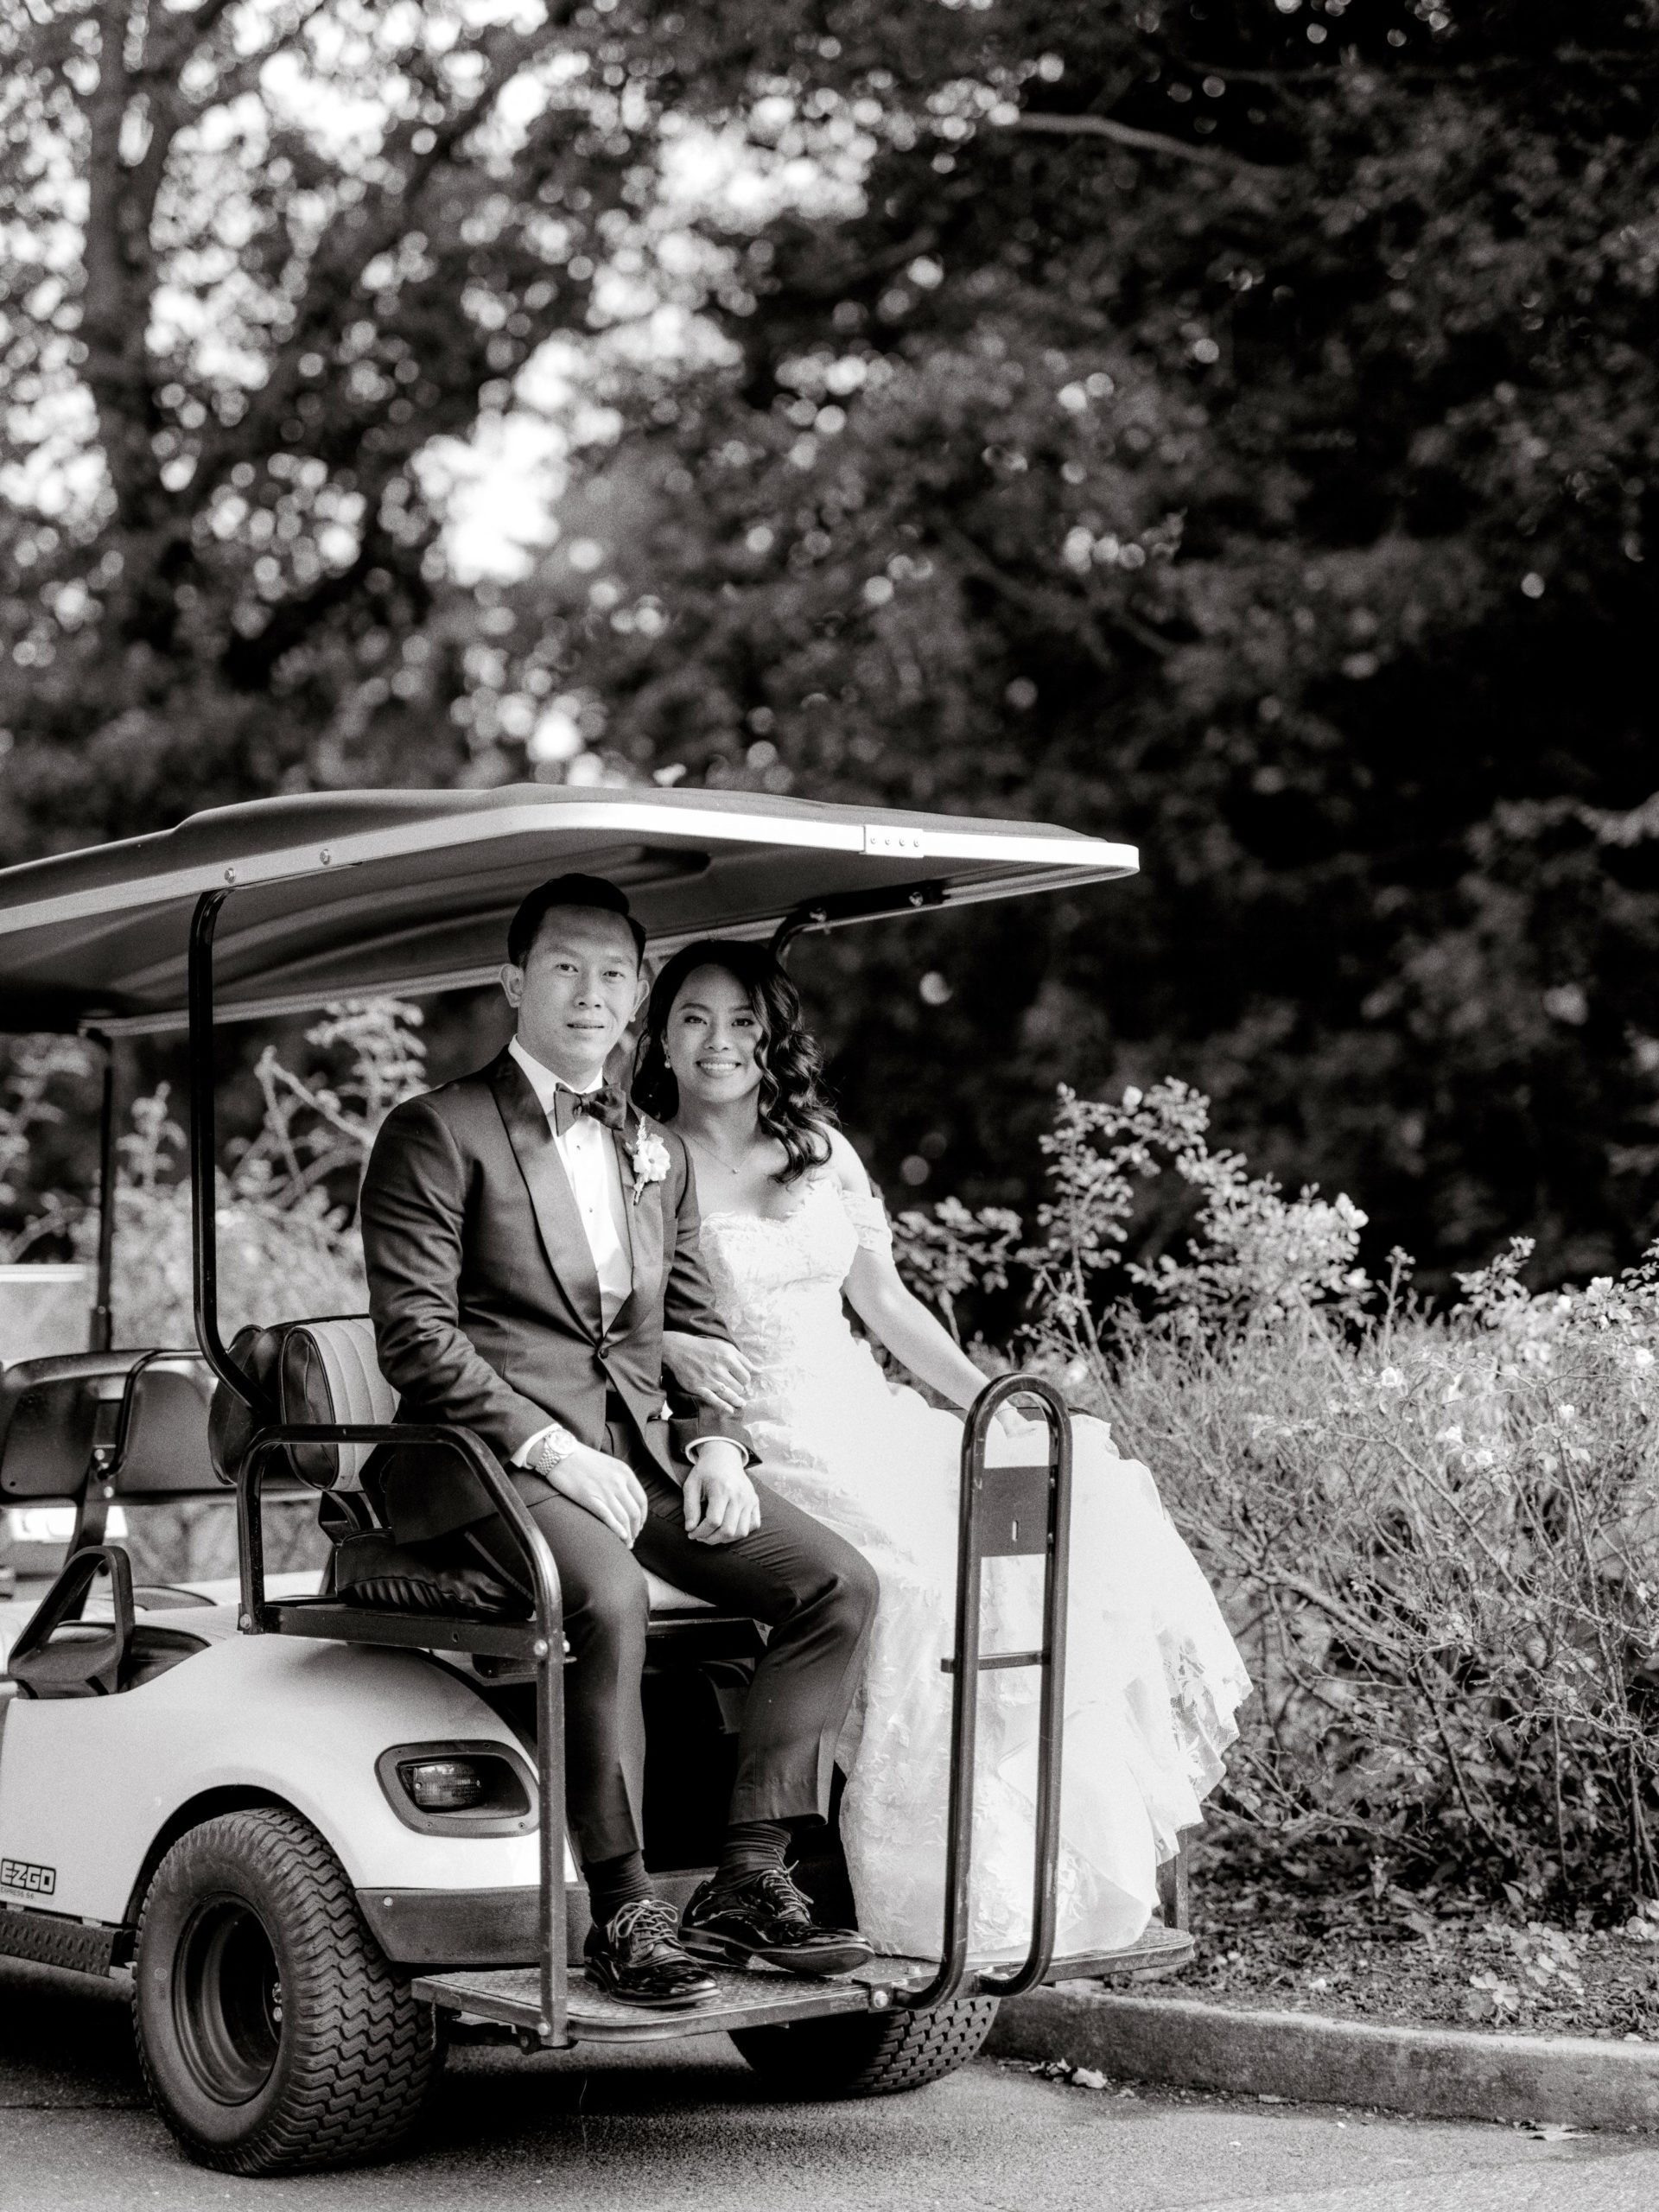 The bride and the groom are sitting on a golf cart inside The Brooklyn Botanic Garden. Hiring a wedding planner image by Jenny Fu Studio